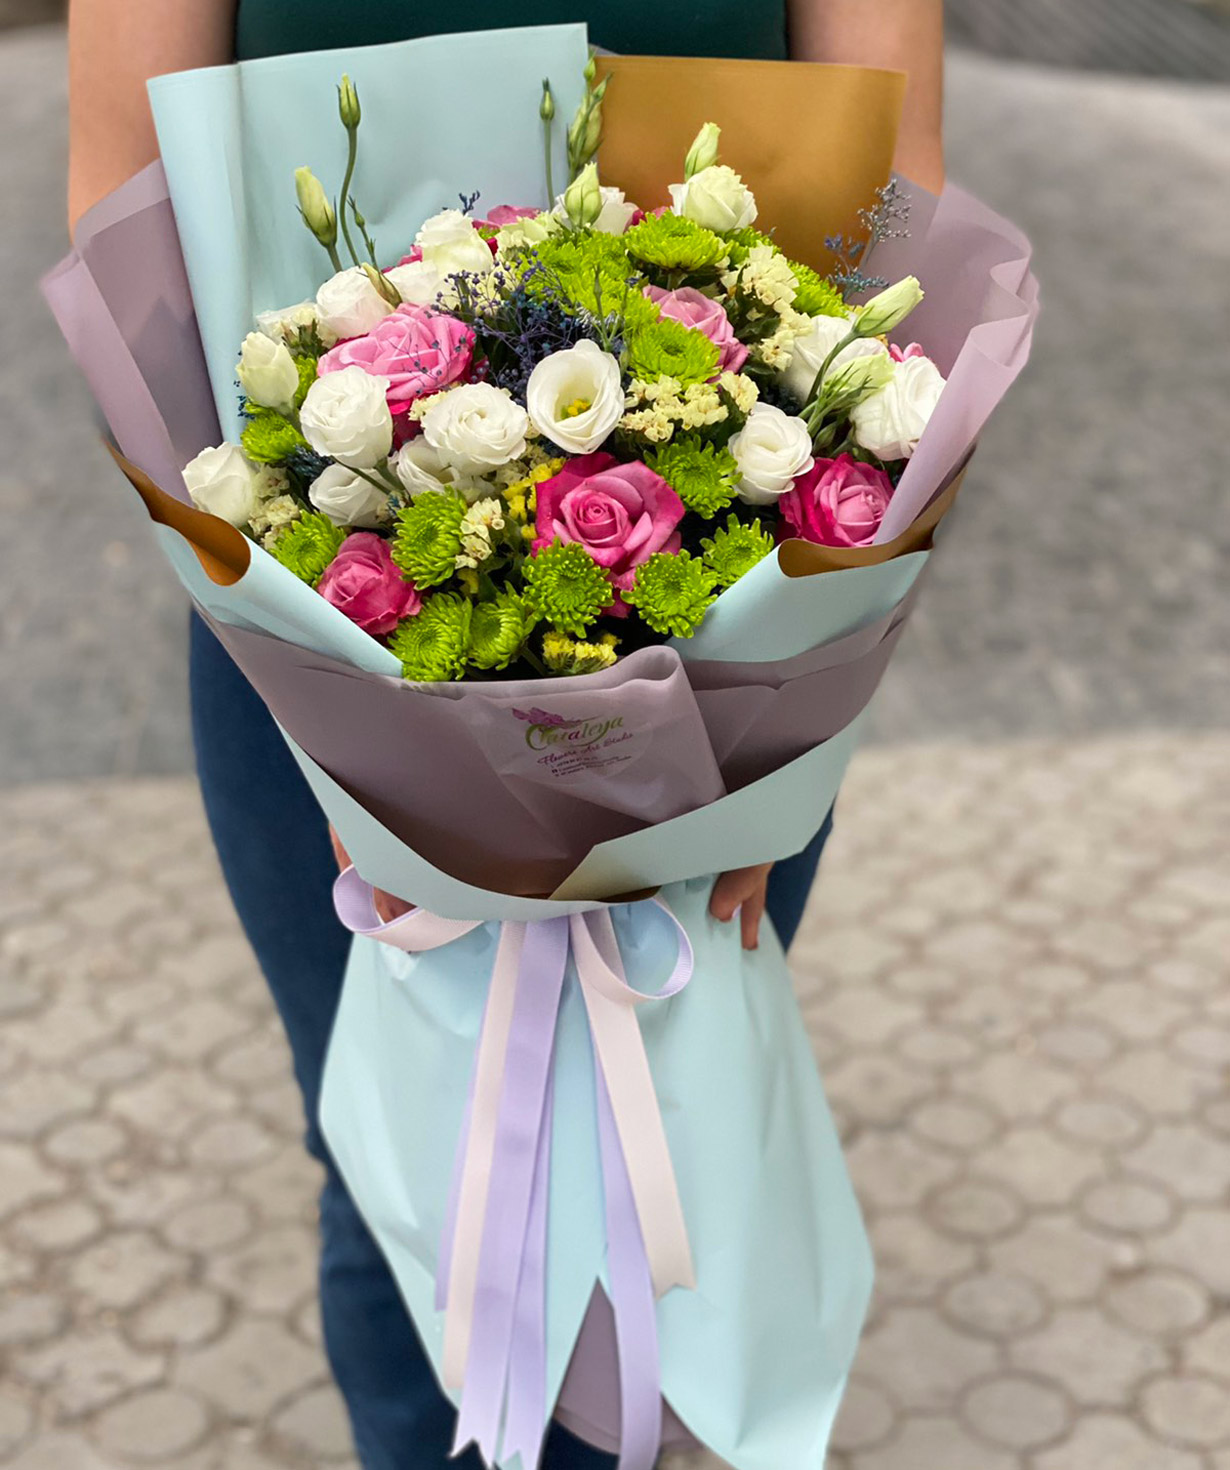 Bouquet `Tripi` with roses and lisianthus